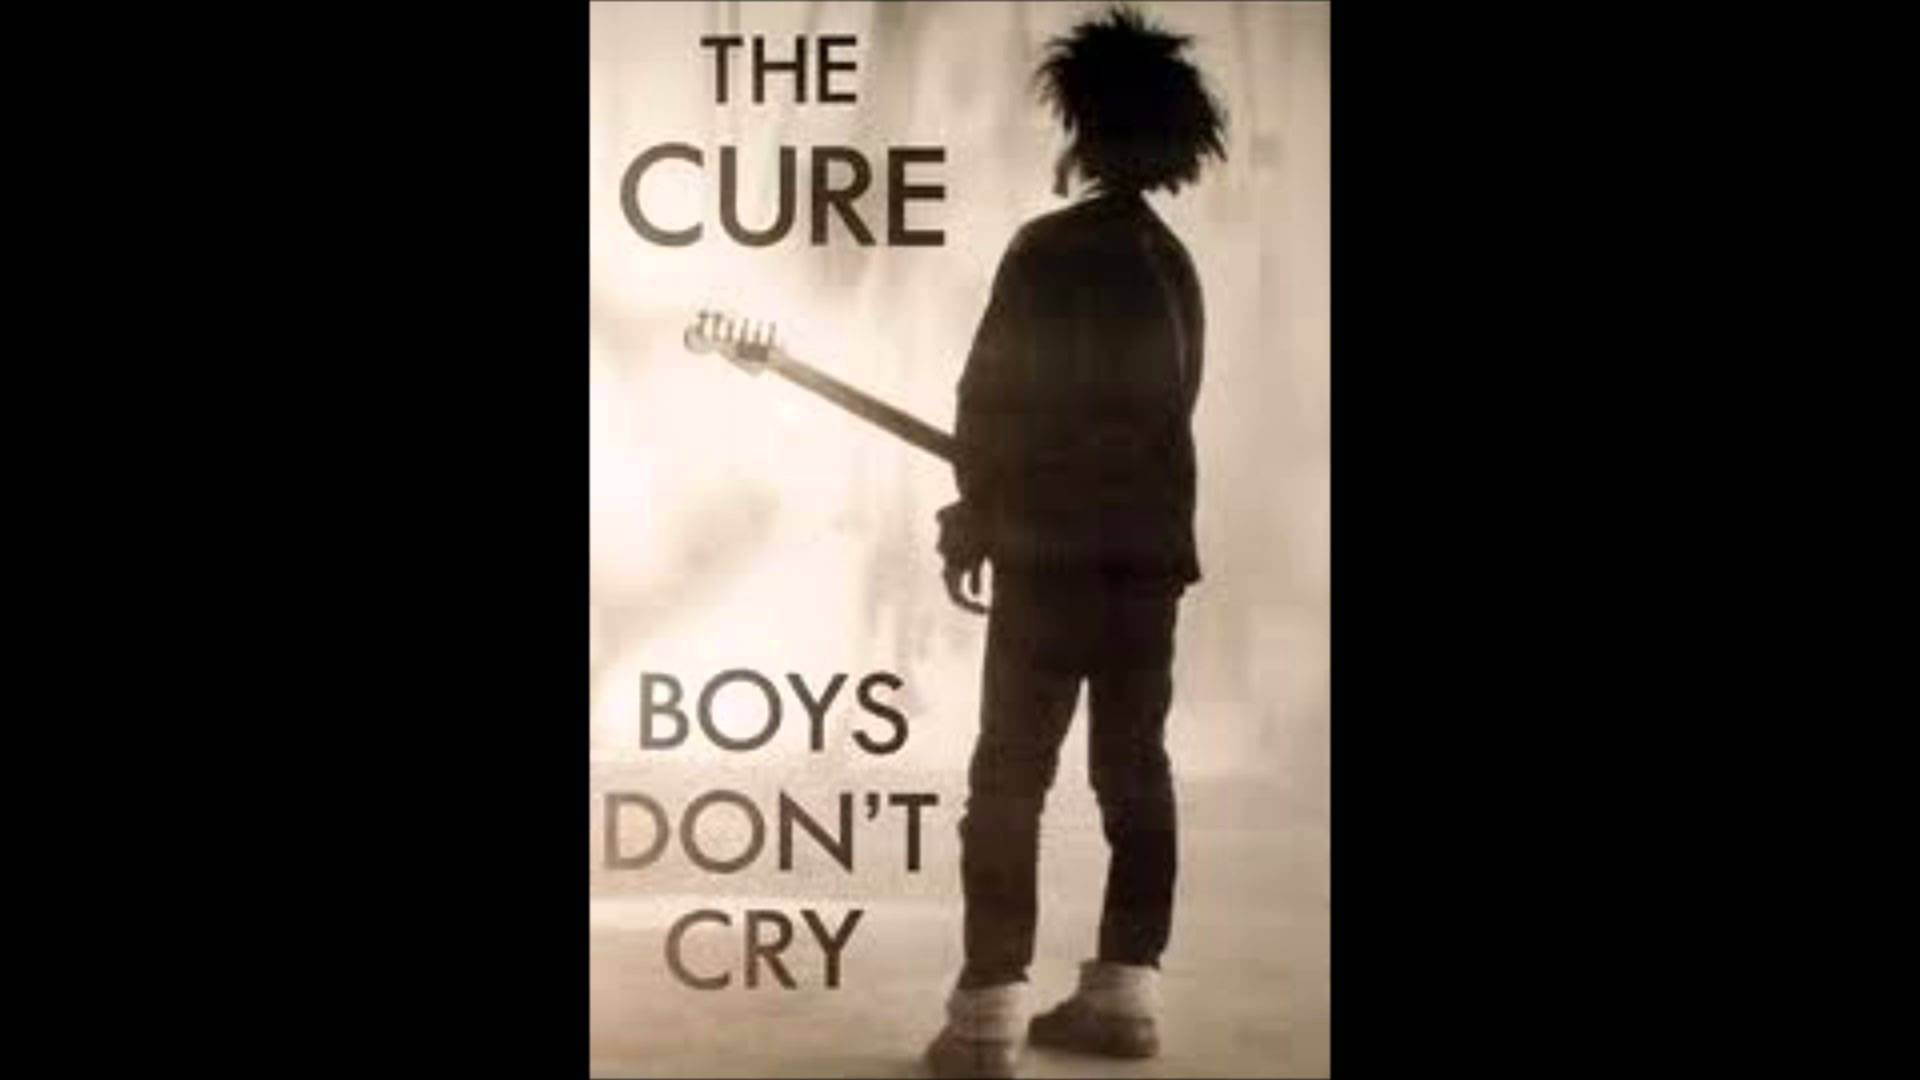 BOYS DON'T CRY CURE Trailers, Photo and Wallpaper